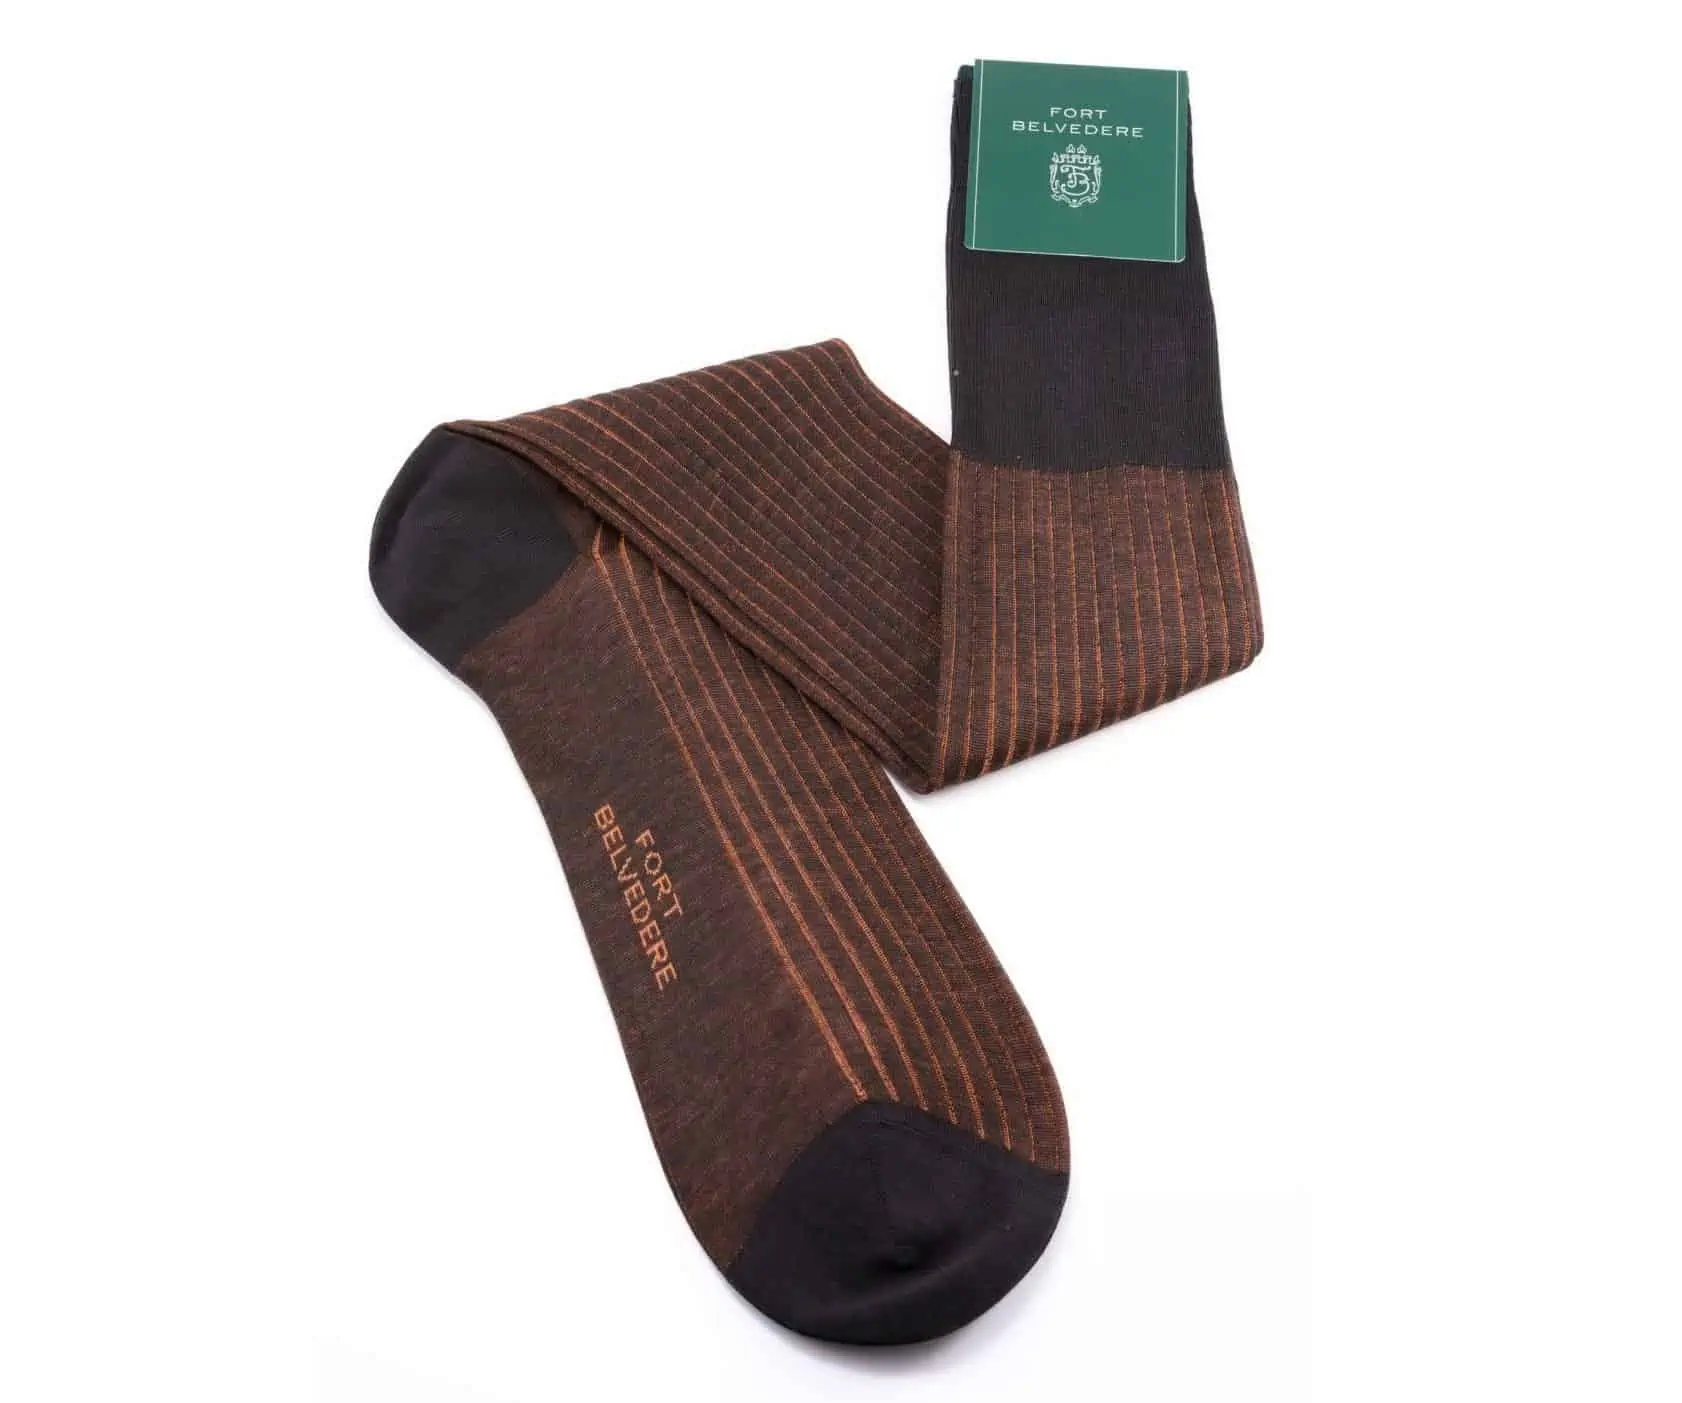 Orange and Charcoal shaow stripe socks by Fort Belvedere